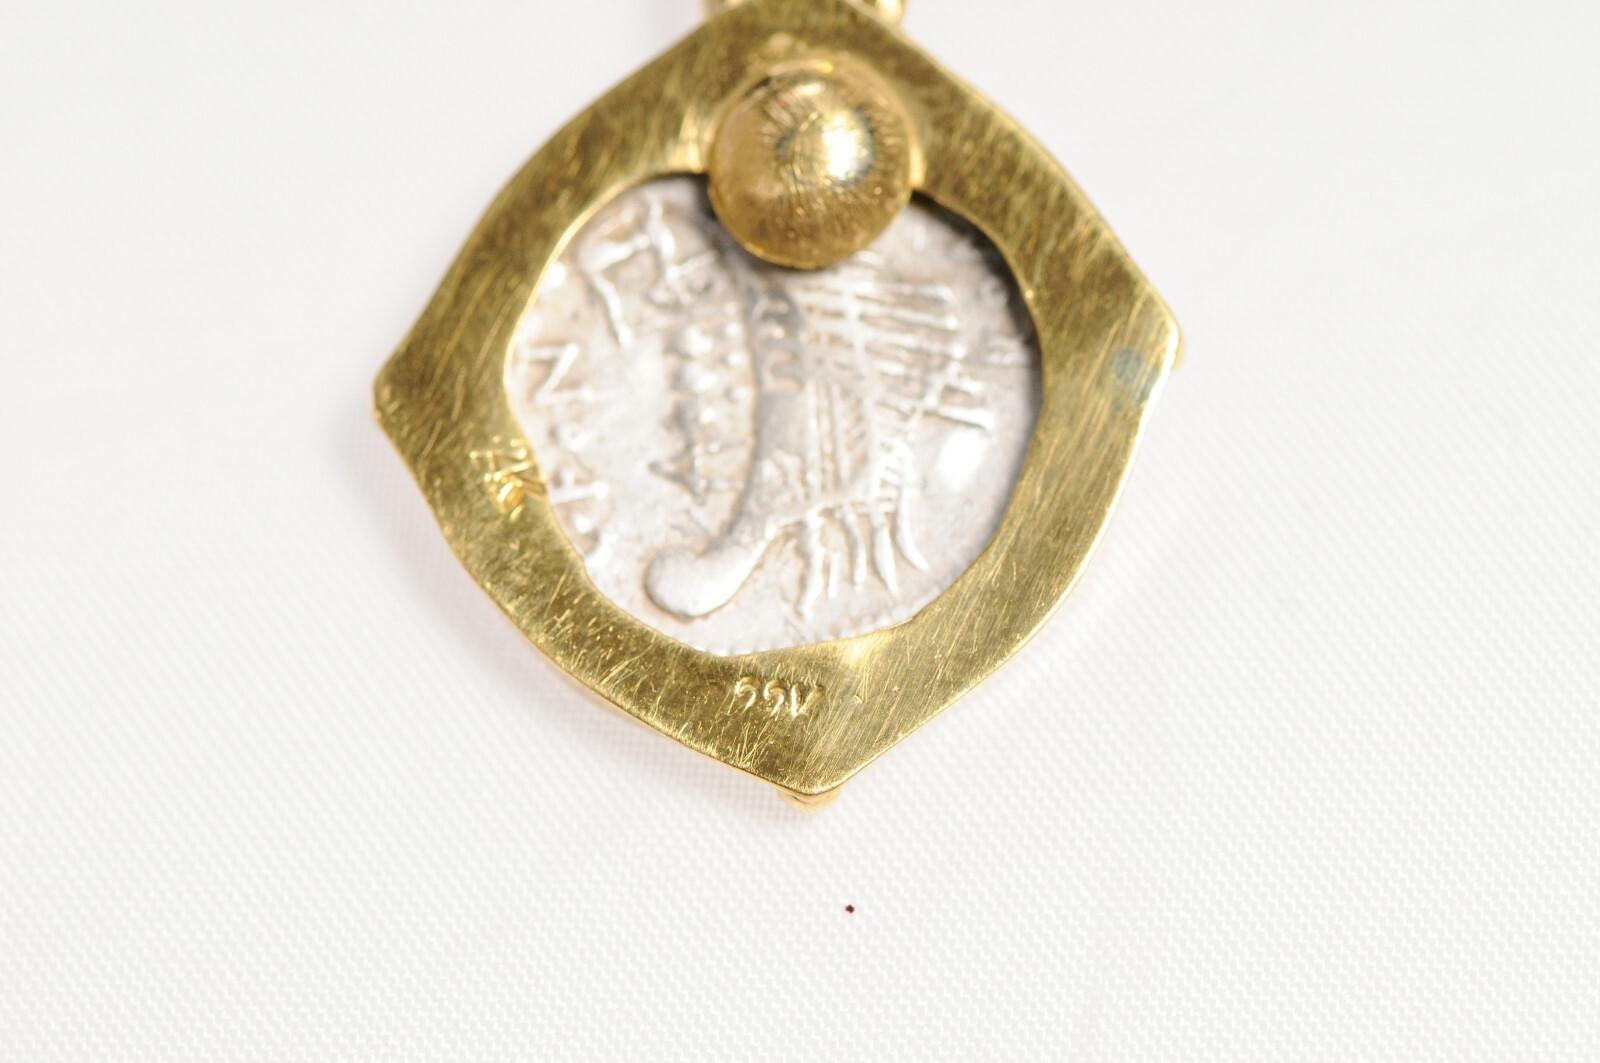 An ancient Janus coin in gold surround with bezel diamond accent. In ancient Roman mythology, Janus is the god of beginnings and transitions, also of gates, doors, passages, endings and time. He is usually depicted as having two faces, since he